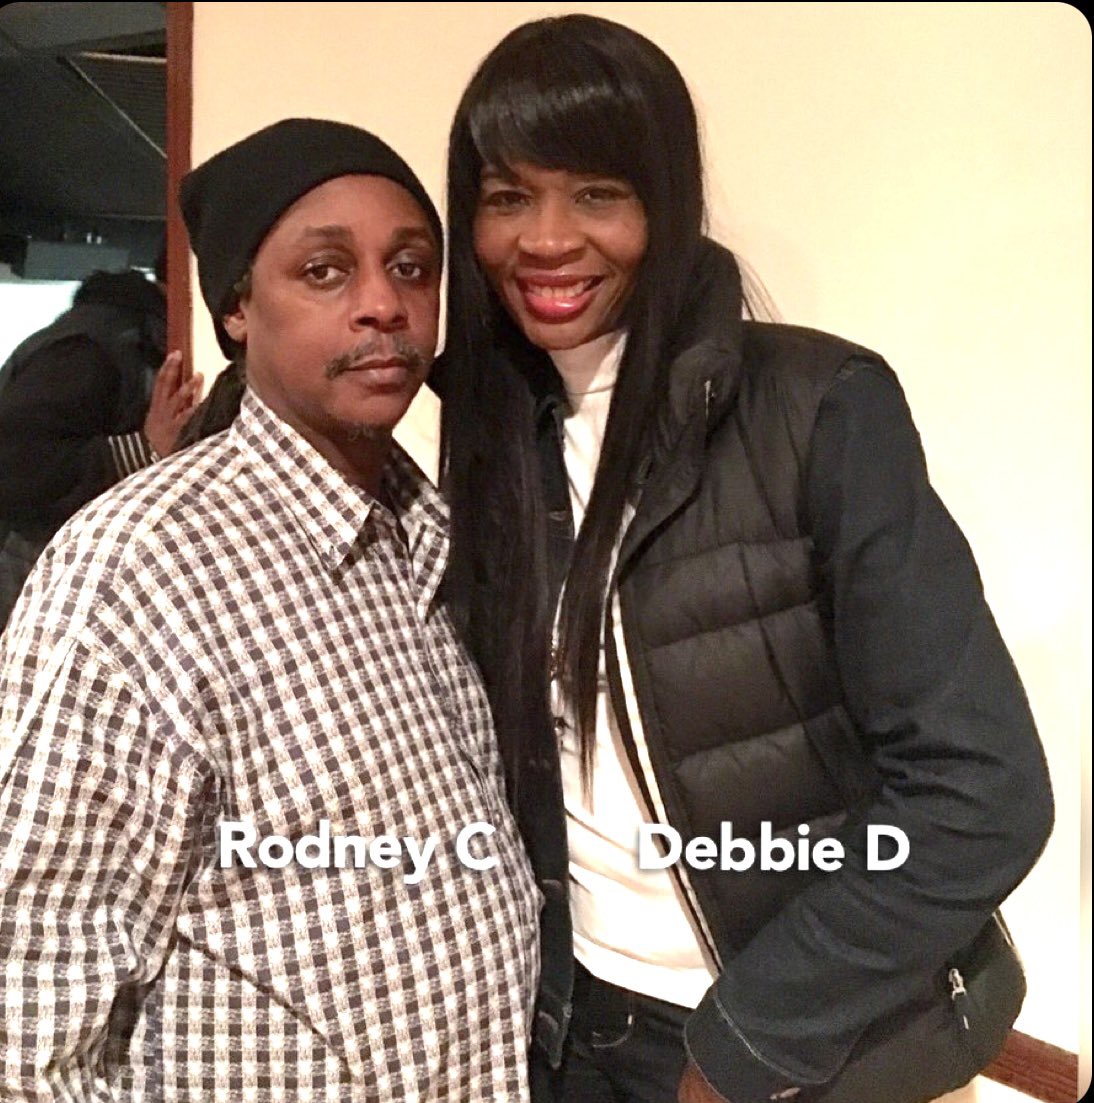 A word from the wise! “No matter what! Always keep a 16 in your pocket”! - Lil Rodney Cee (Funky 4+1, Double Trouble) #mcdebbied #firstfemalemcsoloist #ImAPioneer